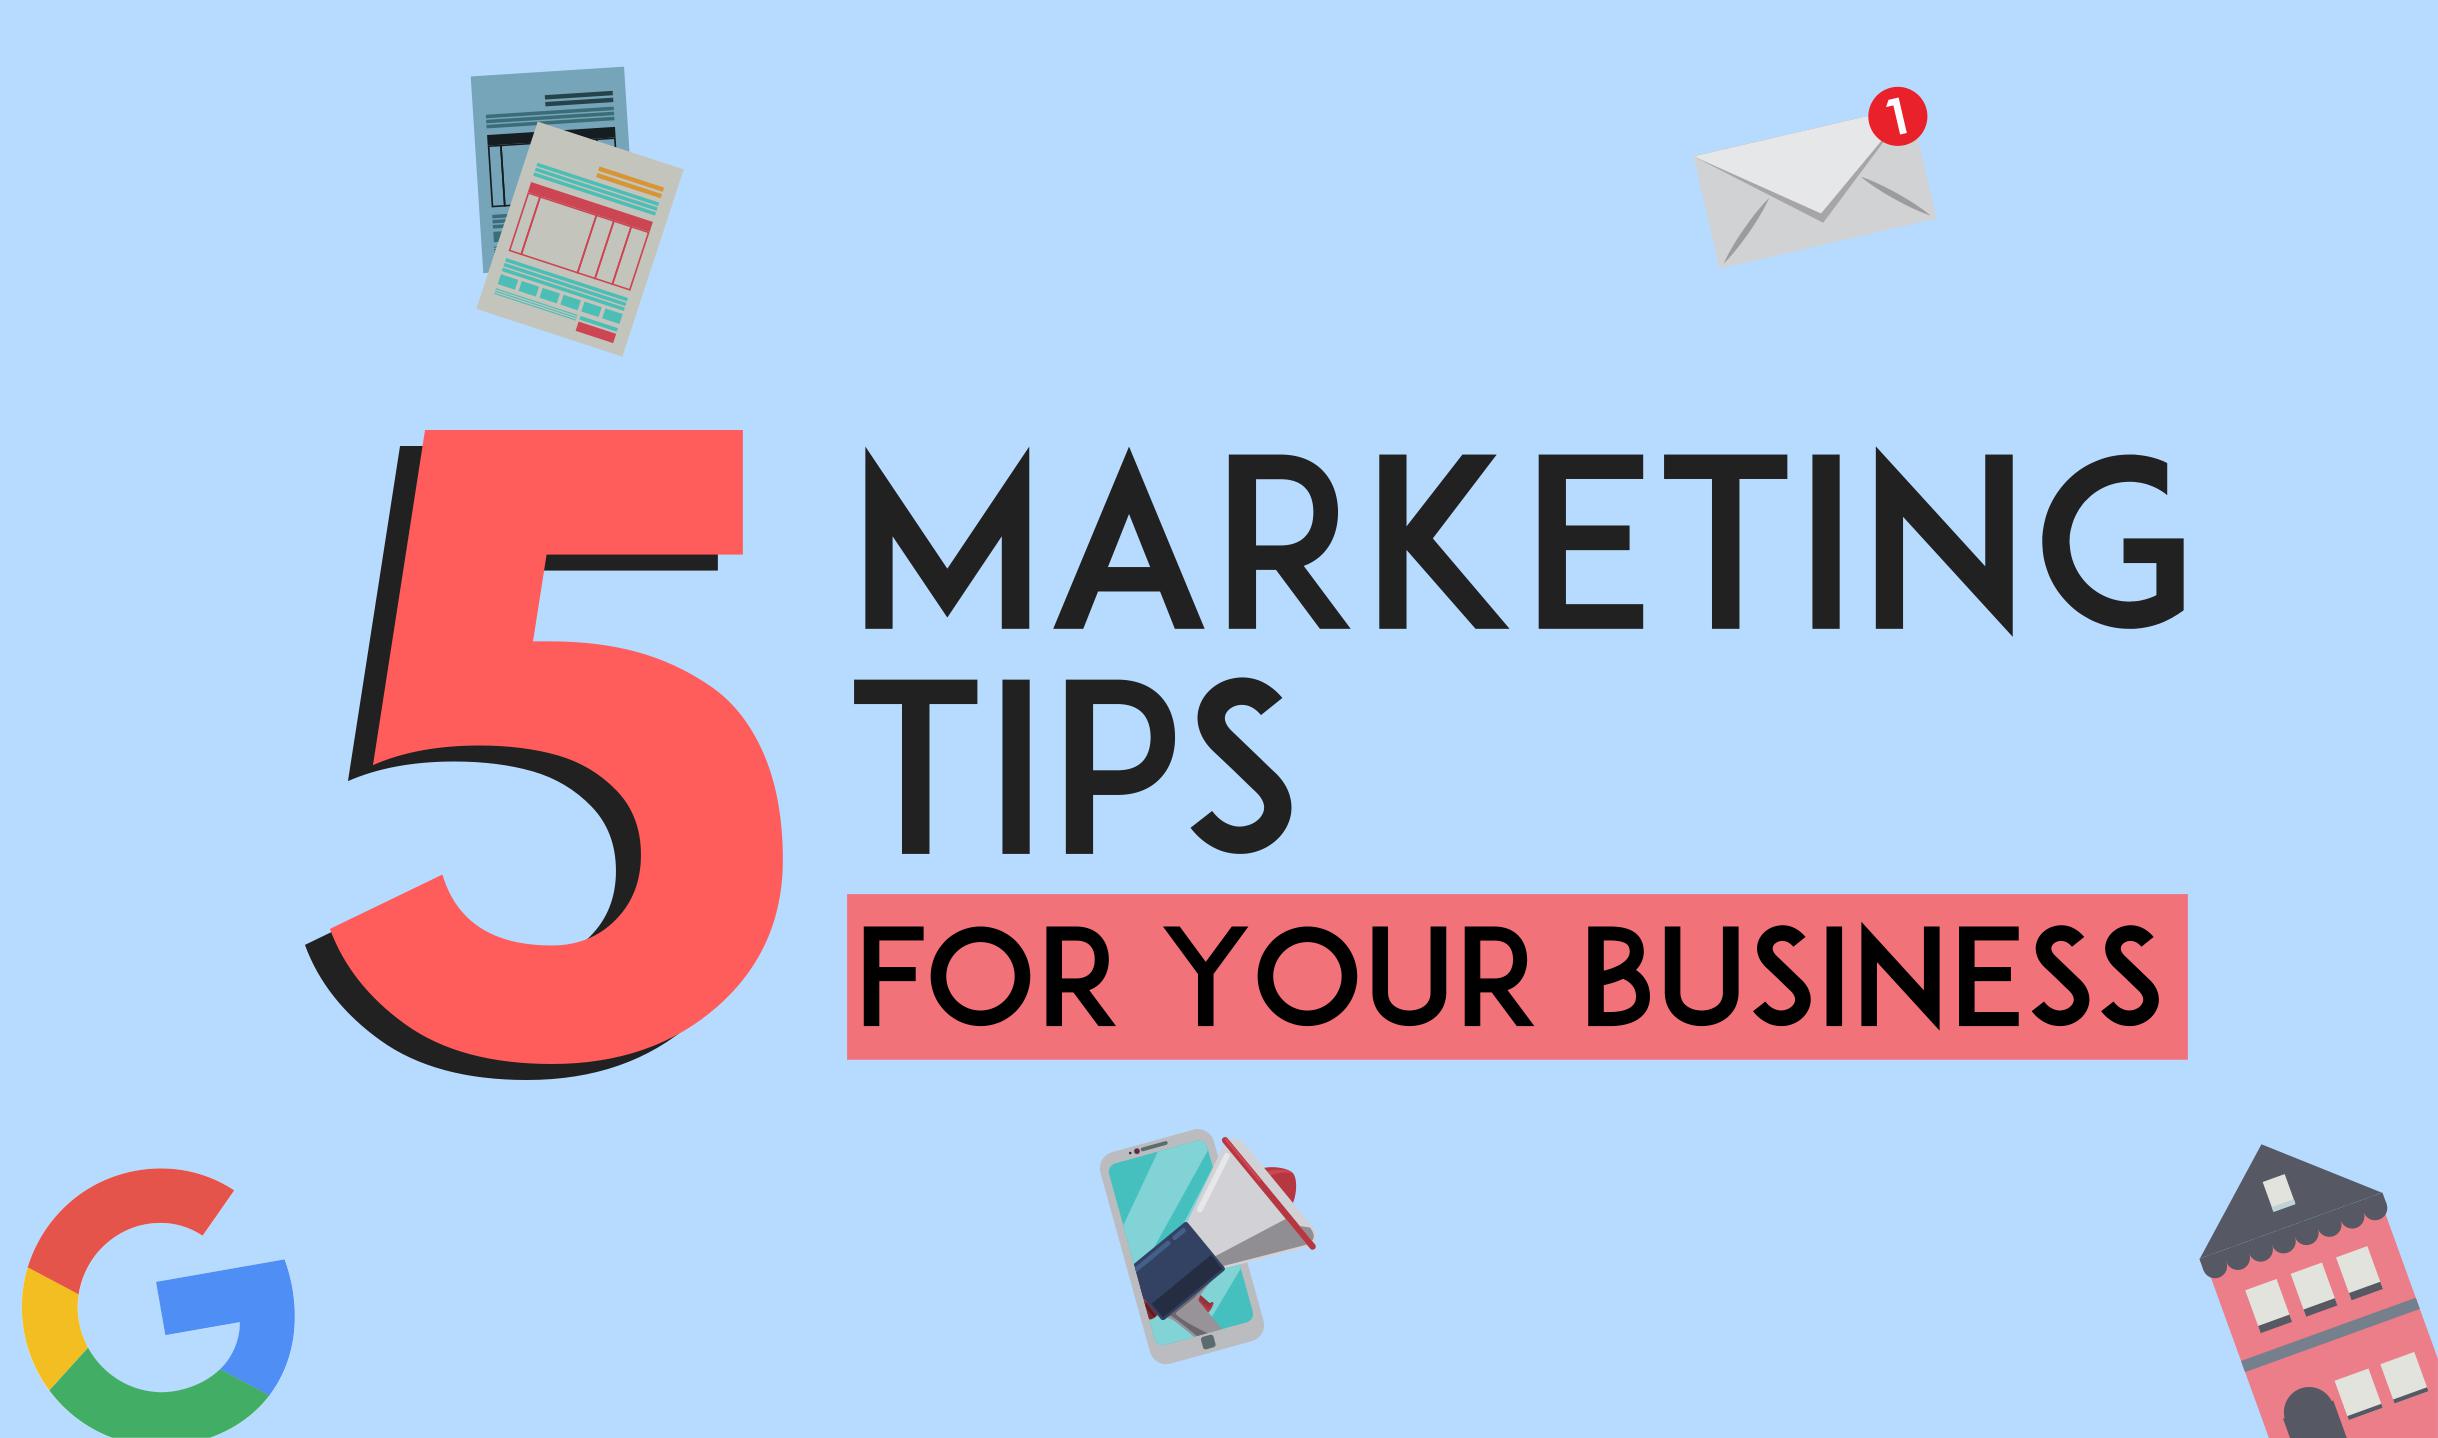 5 marketing tips for small businesses in 2019